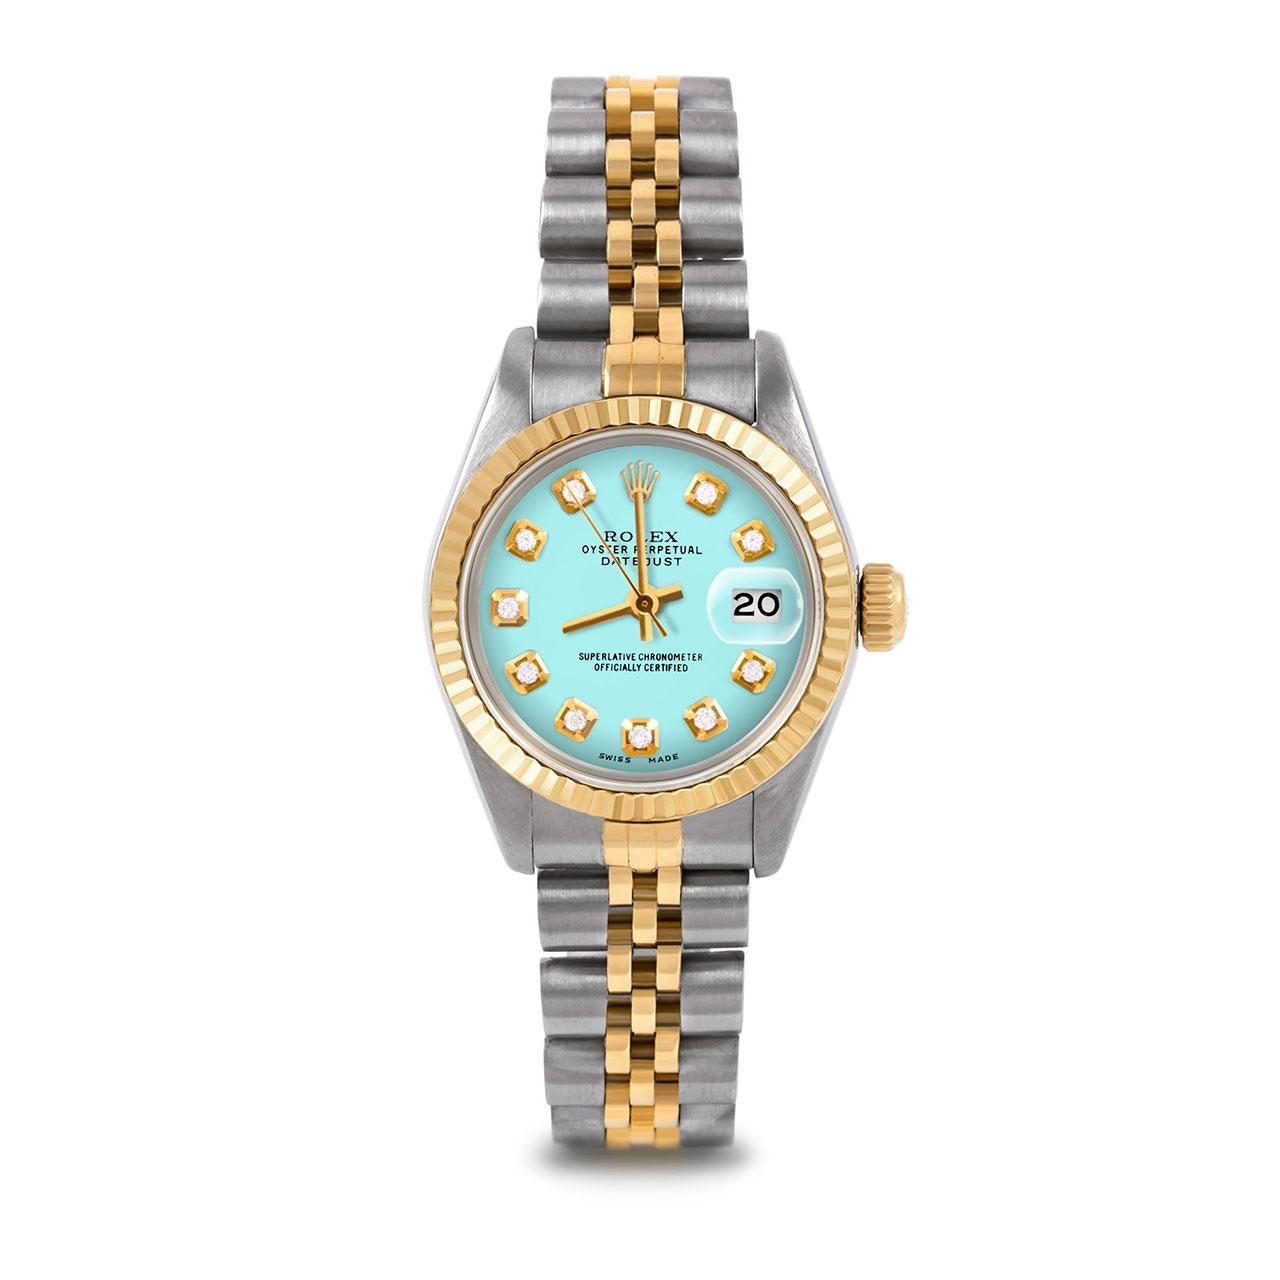 Pre-Owned Rolex 6917 Ladies 26mm Two Tone Datejust Watch, Custom Turquiose Diamond Dial & Fluted Bezel on Rolex 14K Yellow Gold And Stainless Steel Jubilee Band.   

SKU 6917-TT-TRQ-DIA-AM-FLT-JBL


Brand/Model:        Rolex Datejust
Model Number:  